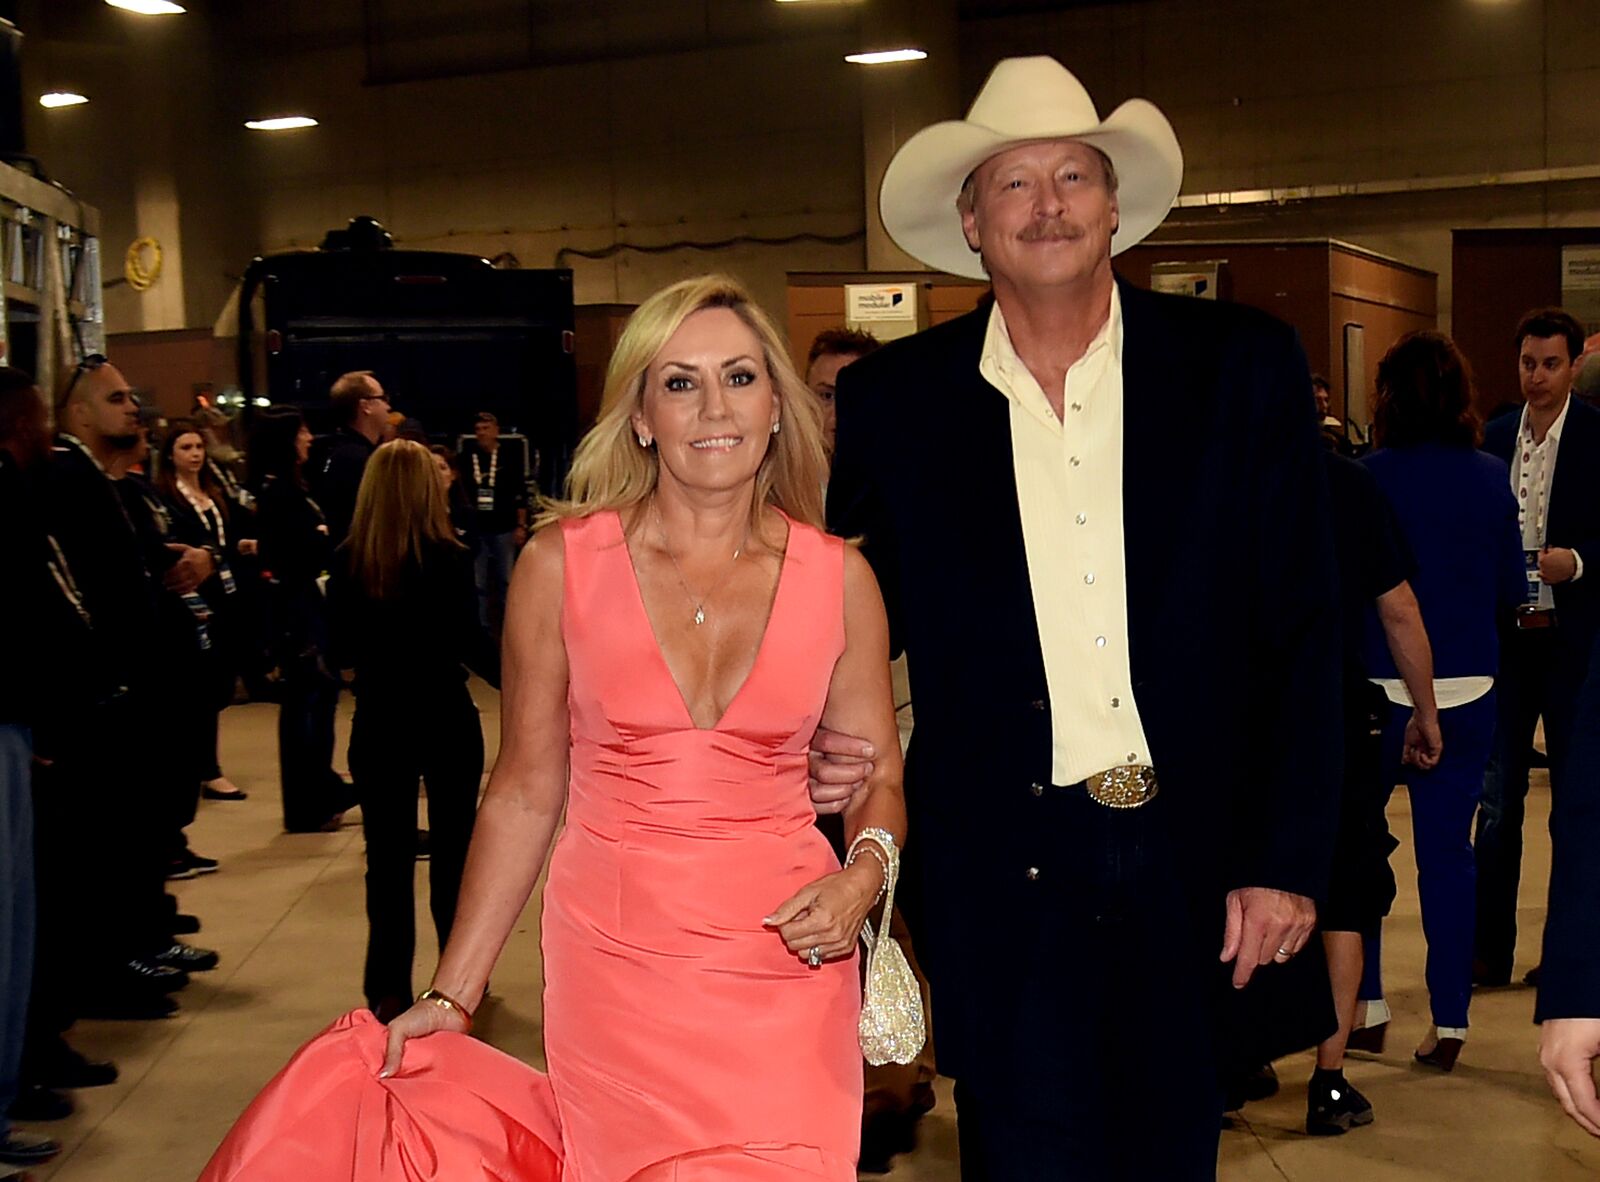 Singer-songwriter Alan Jackson (R) and wife Denise Jackson attend the 50th Academy of Country Music Awards at AT&T Stadium on April 19, 2015 in Arlington, Texas | Photo: Getty Images